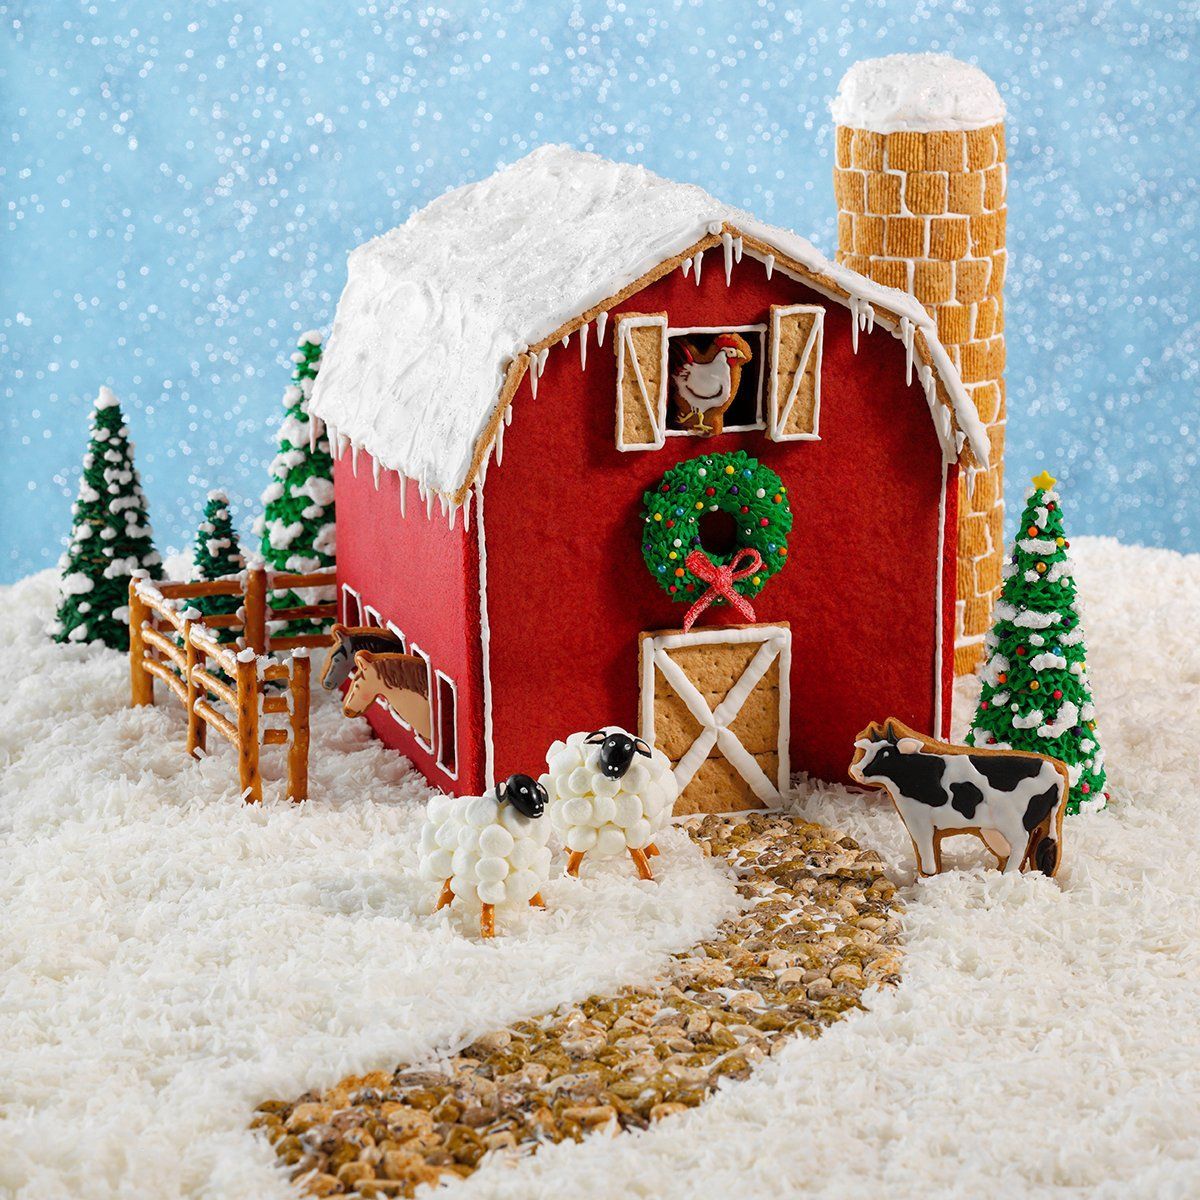 20 Must-See Gingerbread House Ideas -   16 gingerbread house designs ideas